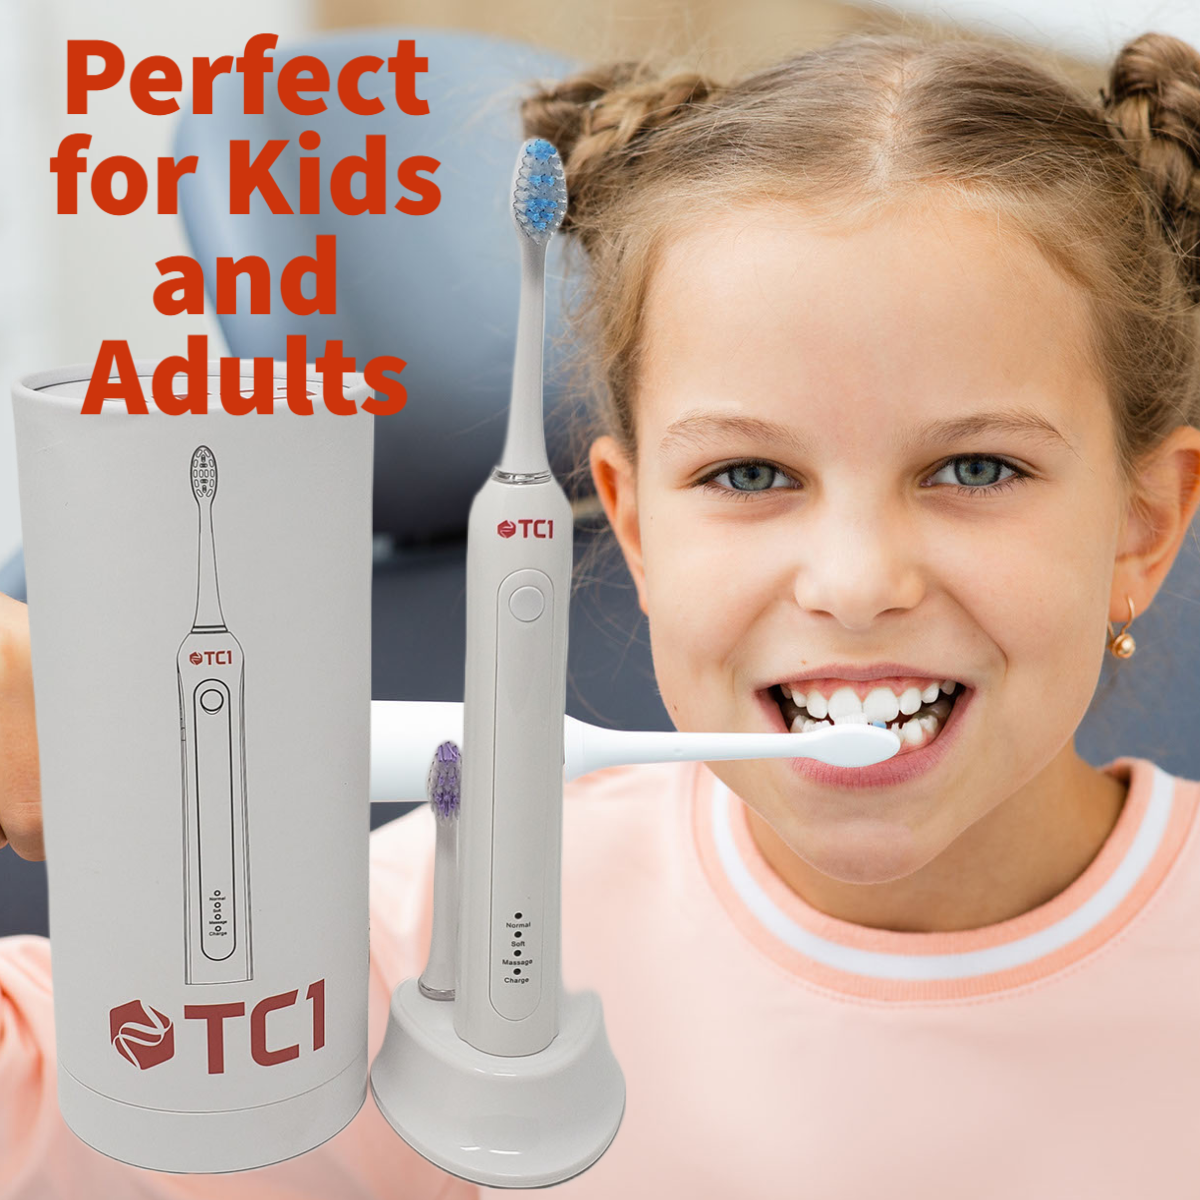 Sonic Toothbrush Because Good Health Starts with Your Mouth – TC1 Gel